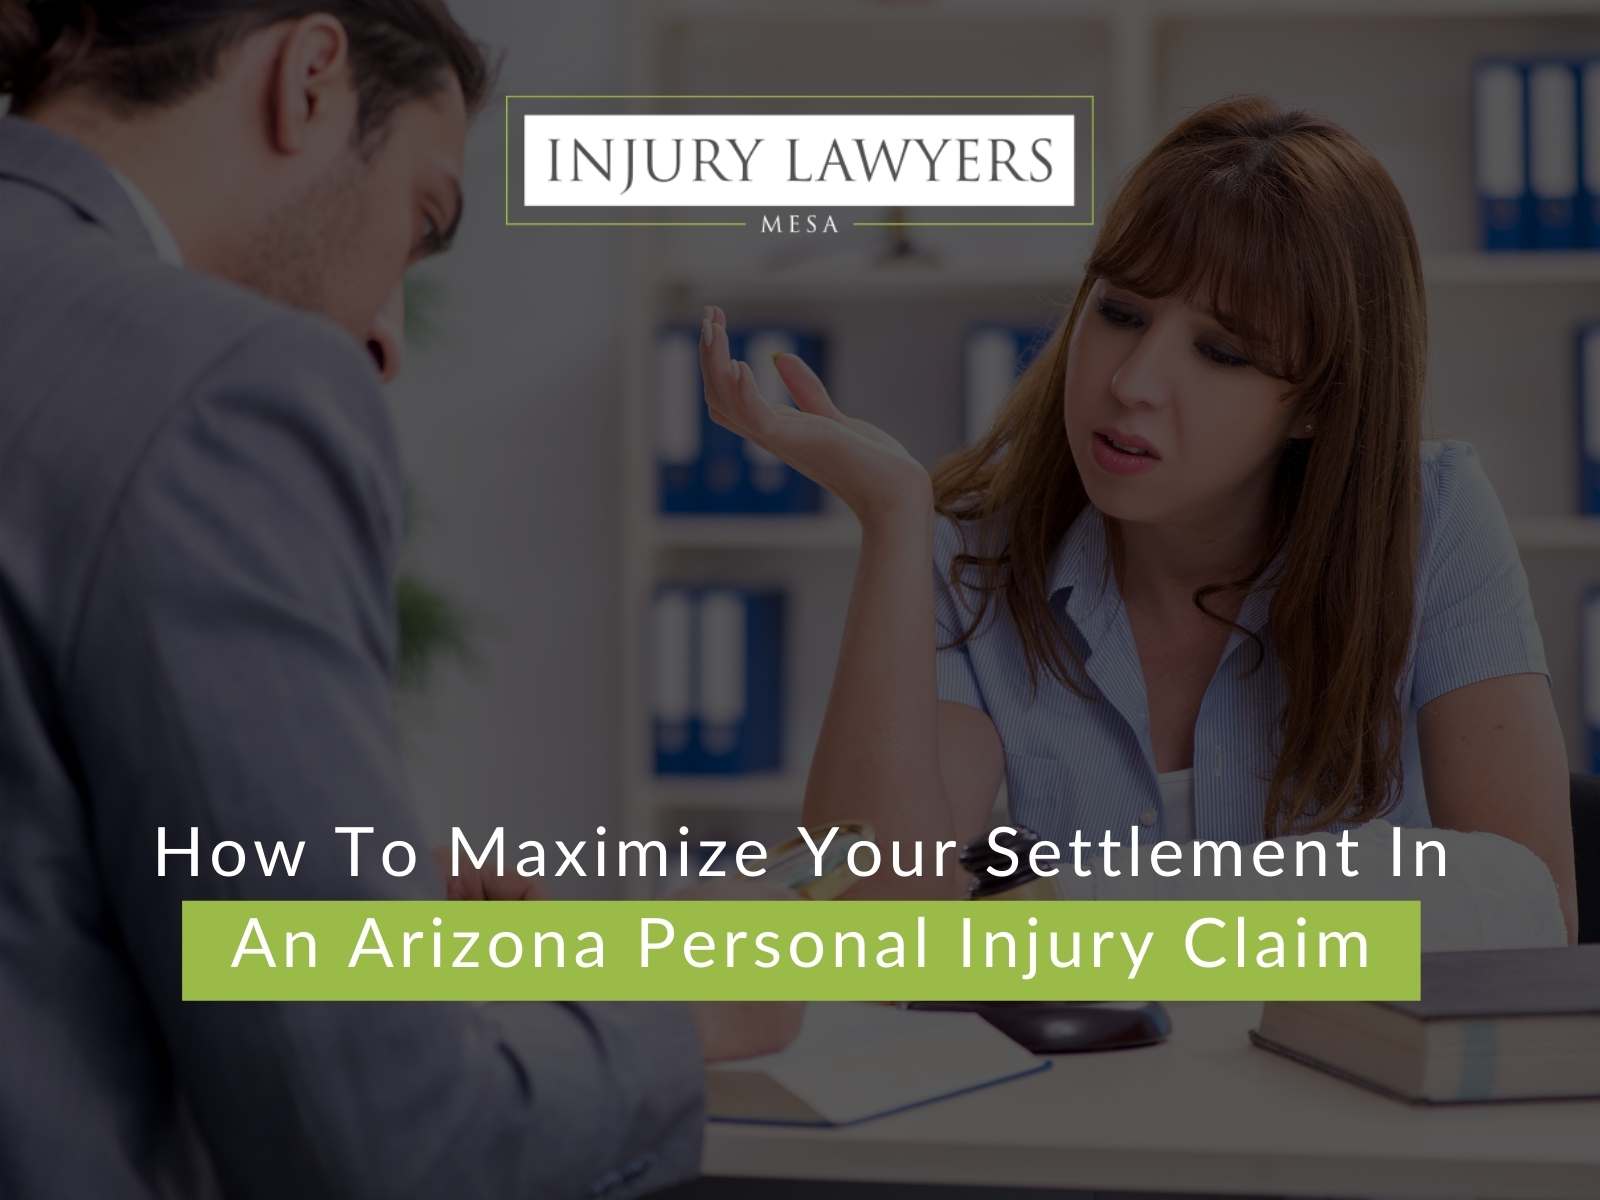 How To Maximize Your Settlement In An Arizona Personal Injury Claim